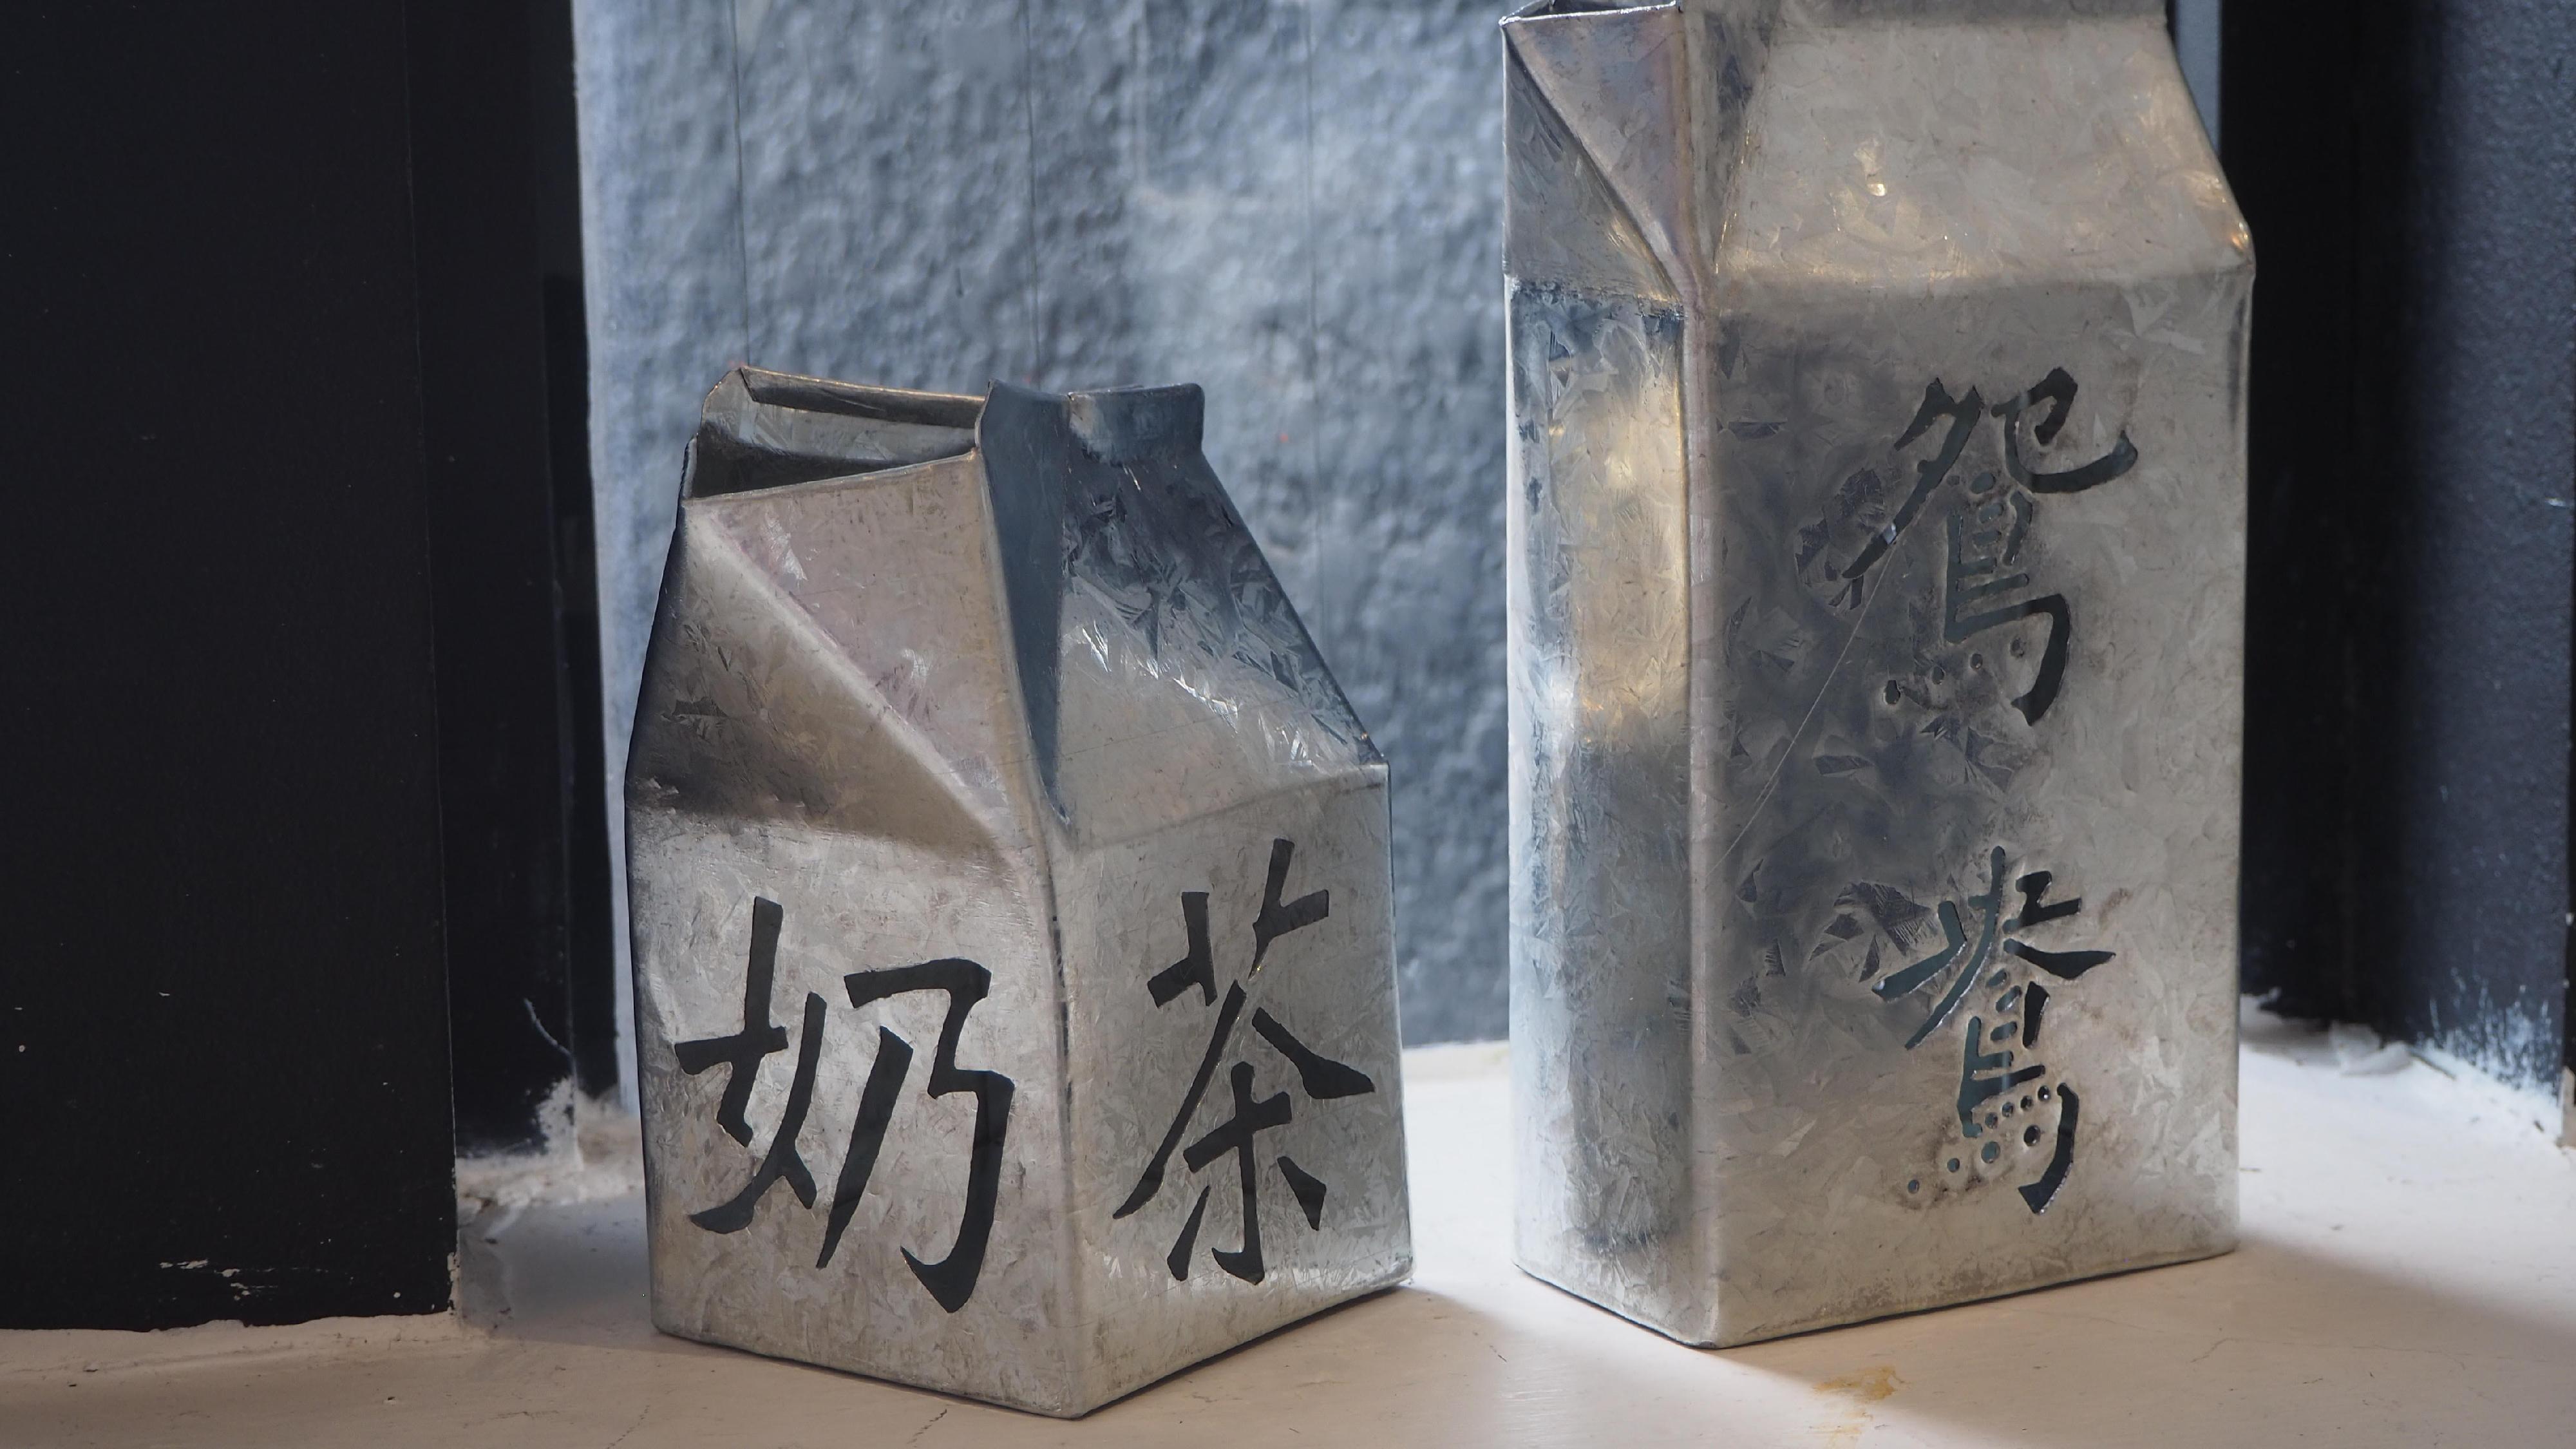 The opening ceremony of the "Beyond Borders: Traces of Hong Kong Stories" art exhibition was held at CF Richmond Centre in Vancouver yesterday (June 22, Vancouver time). Photo shows galvanised iron milk cartons made by Hong Kong artist Luk Tsing-yuen, demonstrating the galvanised iron product making technique, a recognised craft of Hong Kong’s Intangible Cultural Heritage.